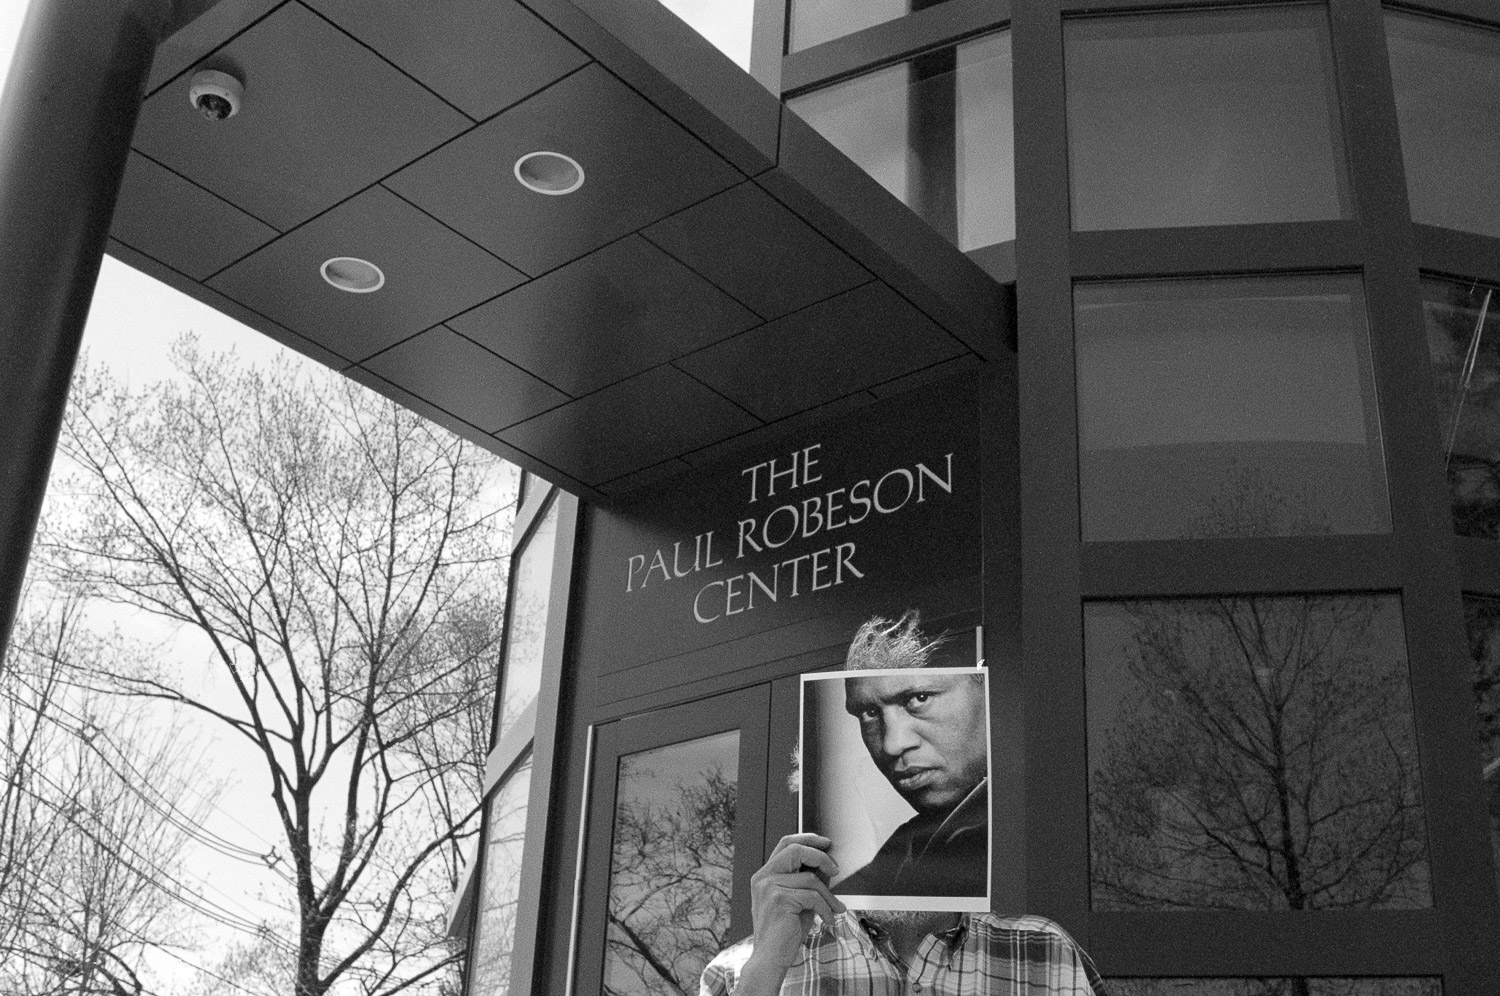 Paul Robeson at the Arts Council of Princeton